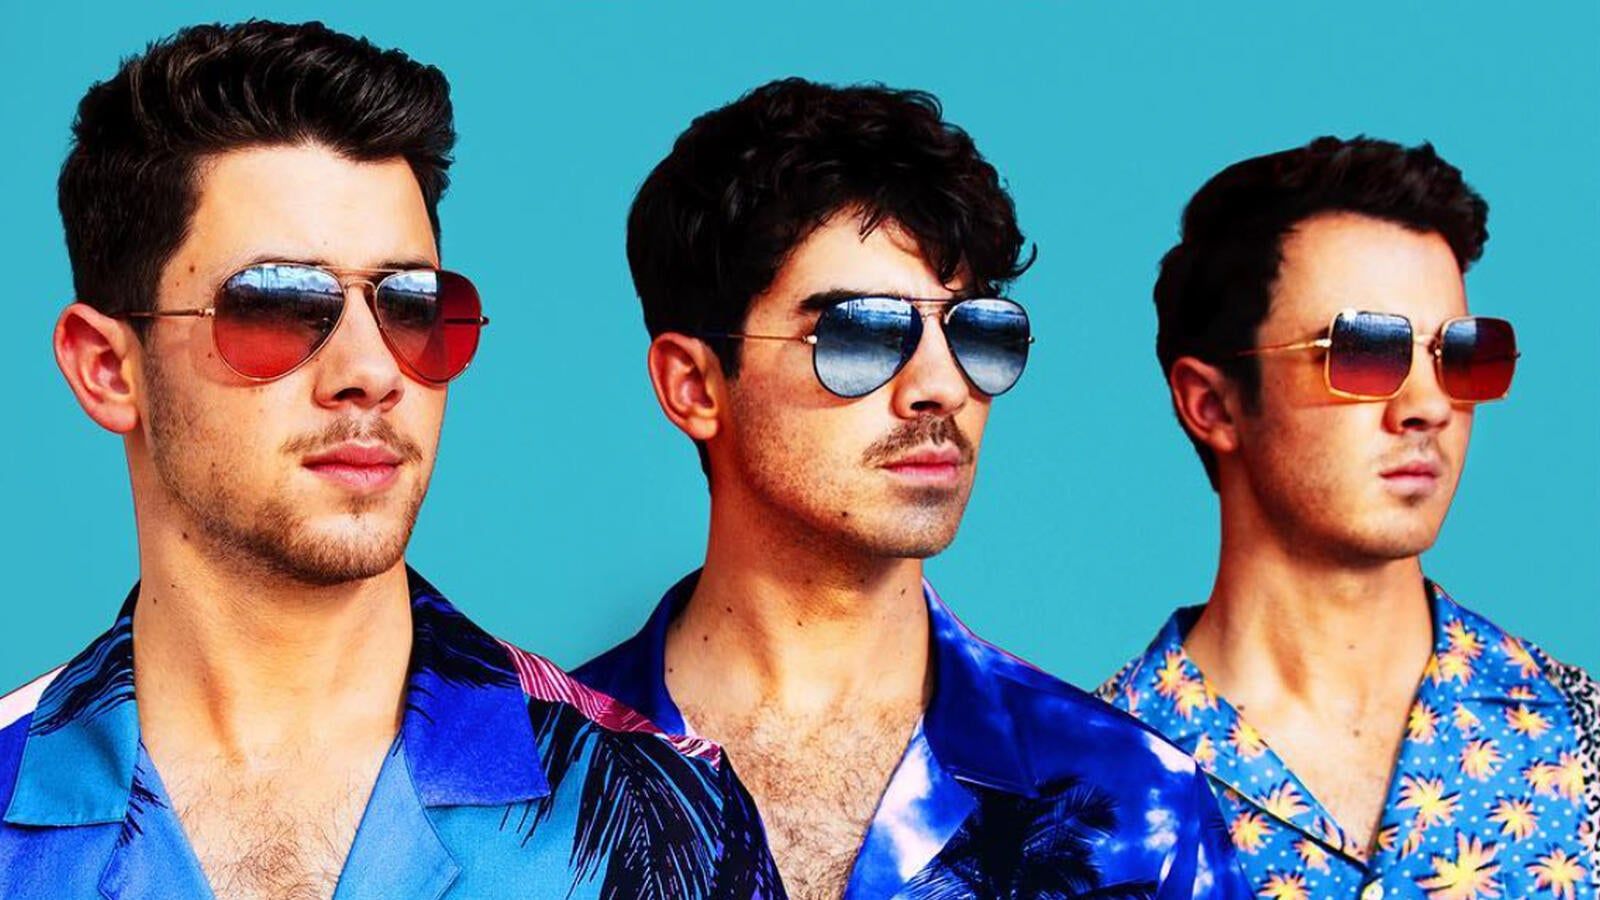 Jonas Brothers to Release Their First Album in 10 Years